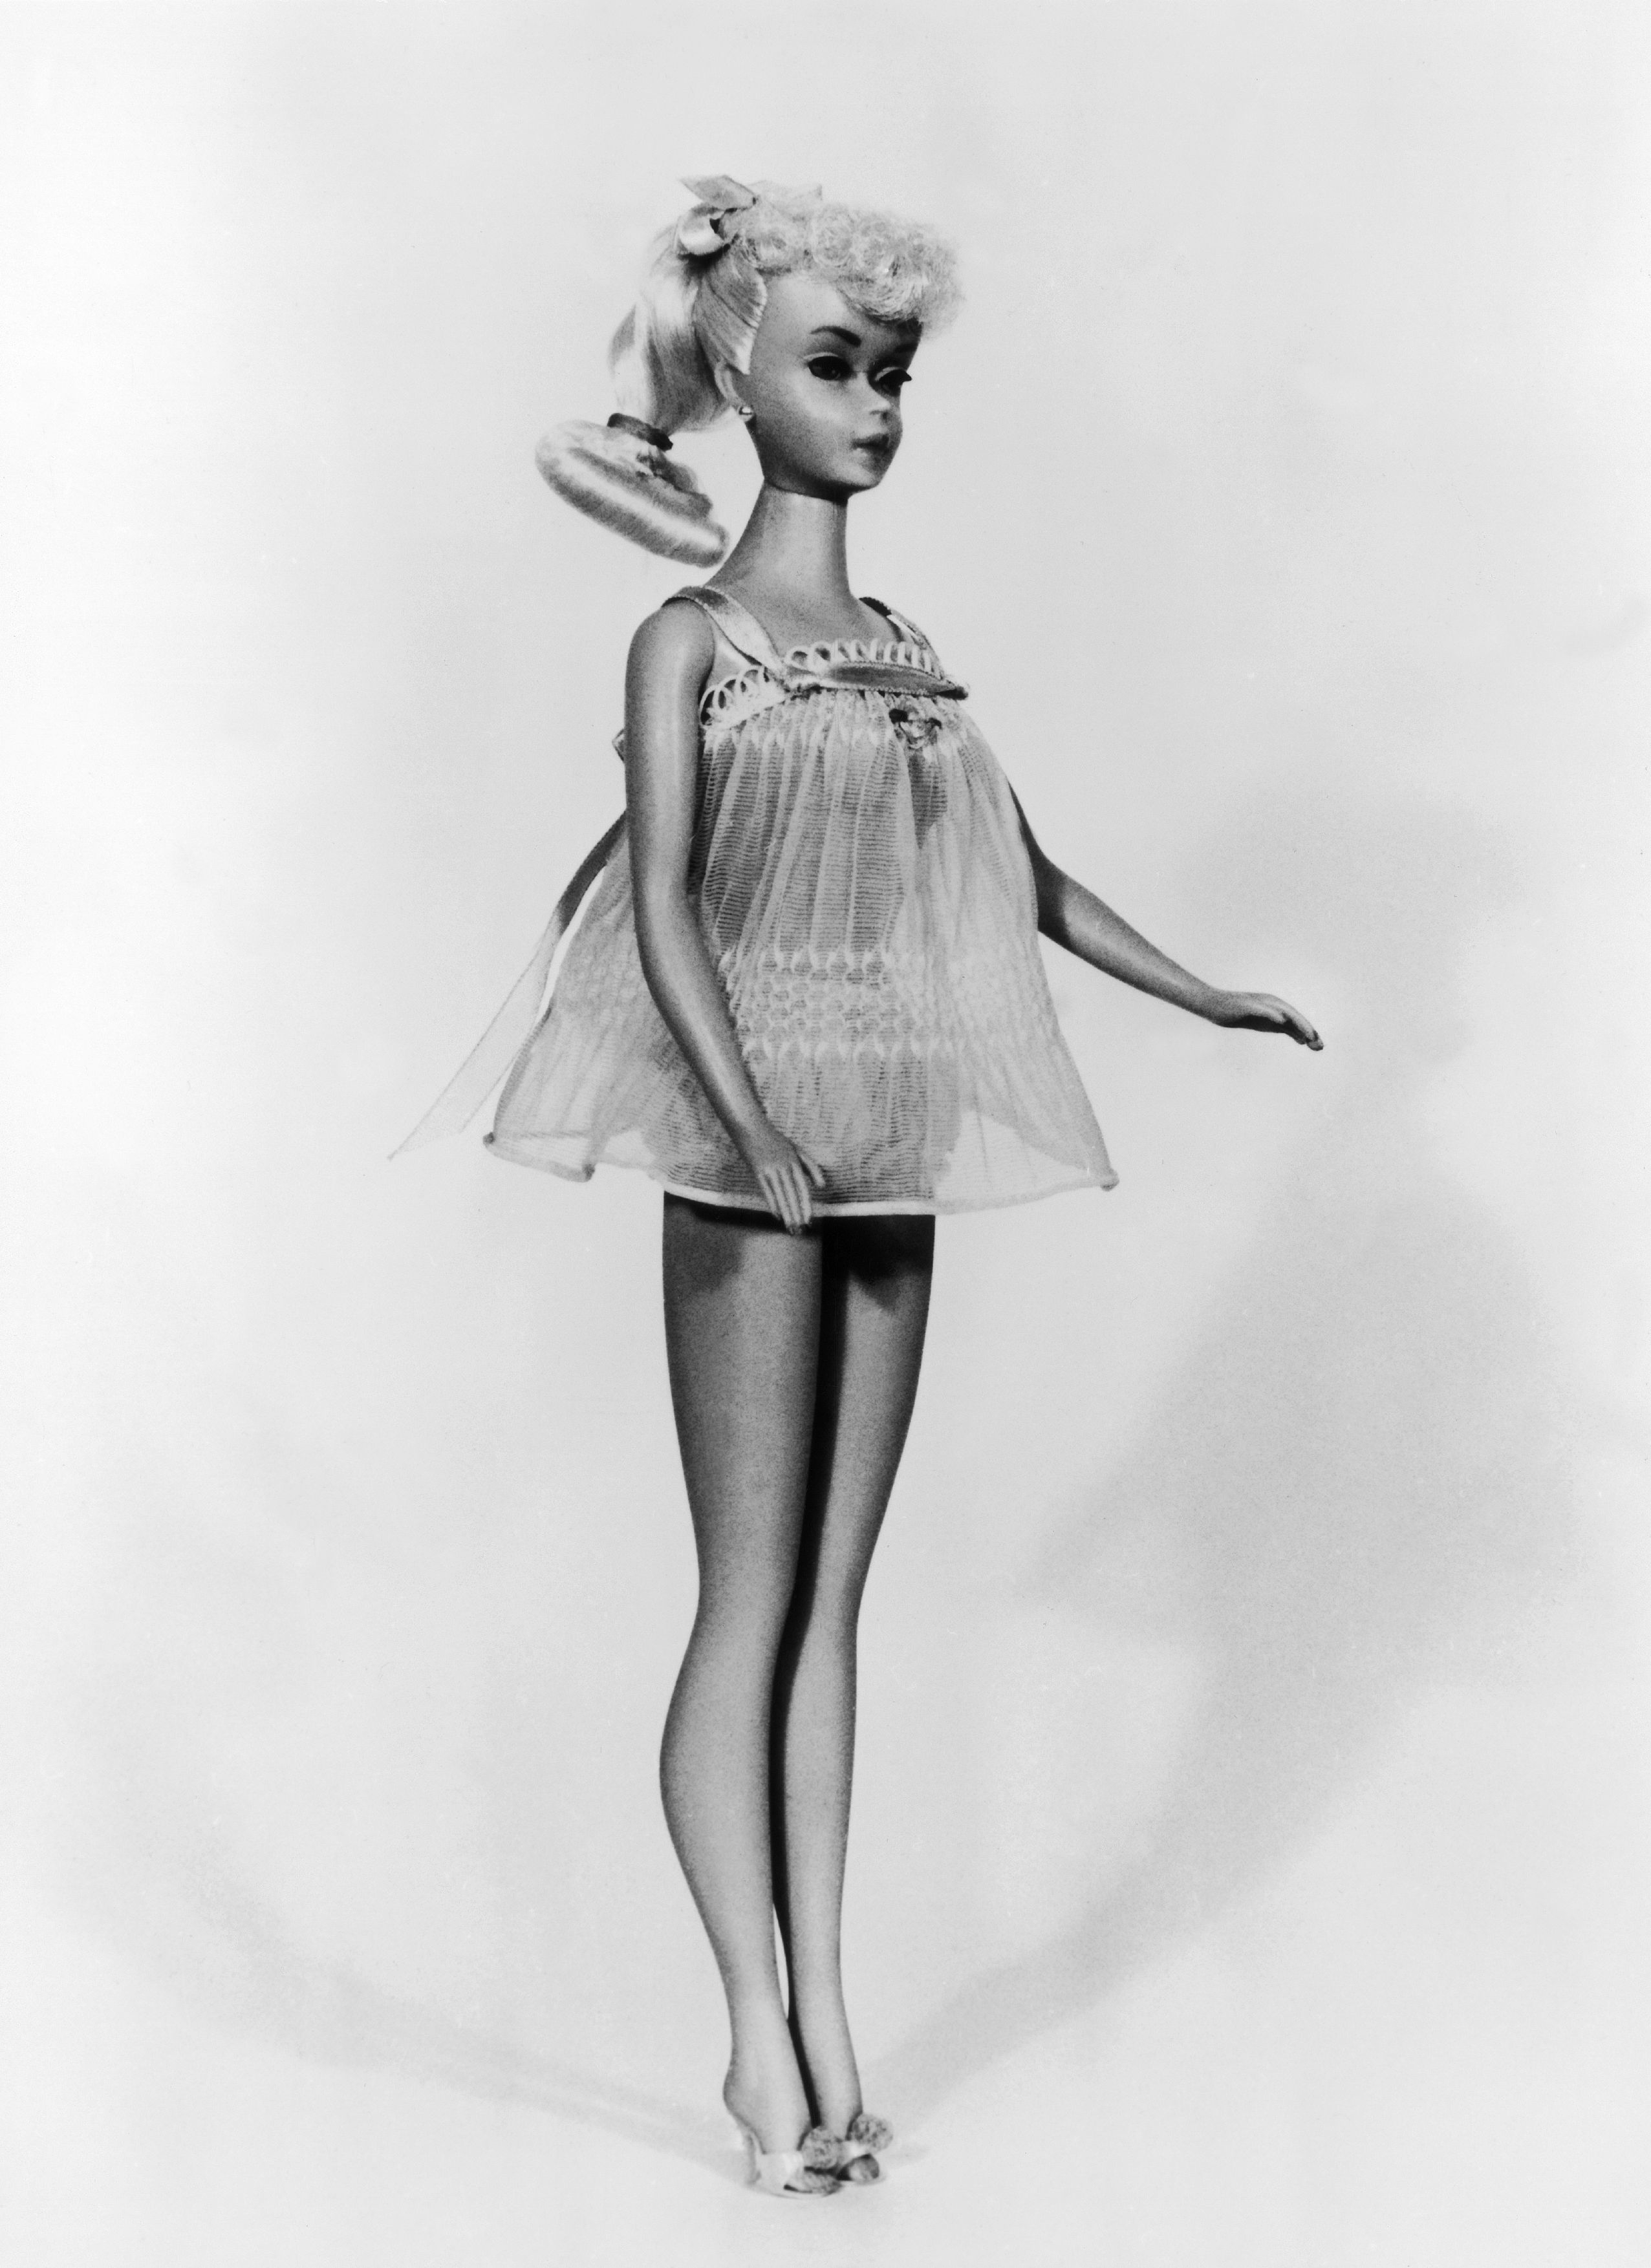 Pin by Shelby on halloween  Barbie fashion sketches, Old barbie dolls,  Barbie dress fashion